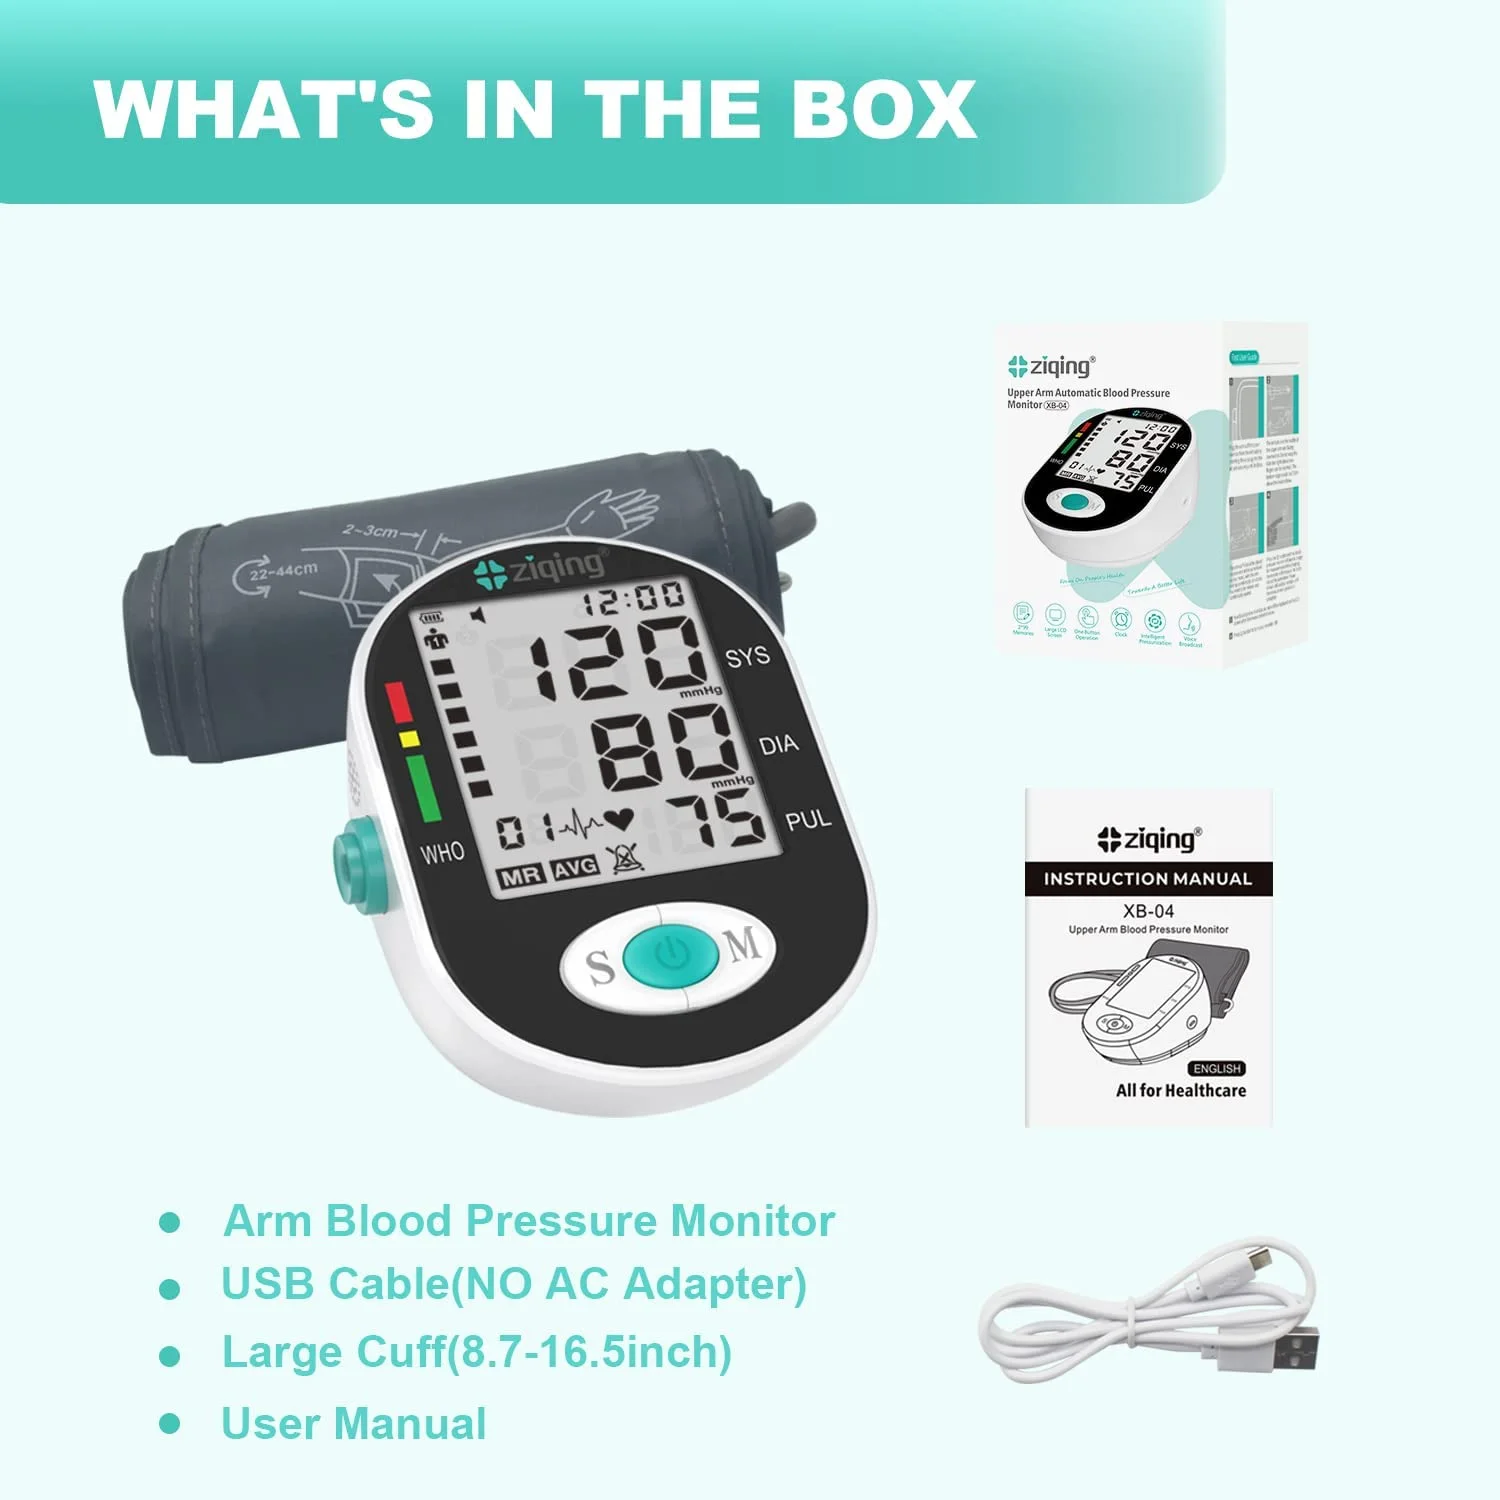 https://ae01.alicdn.com/kf/Sb15e4bf788344bc791caa3ece89c8c4cZ/ziqing-Blood-Pressure-Monitor-Digital-electronic-sphygmomanomet-Automatic-BP-Machine-Heart-Rate-Pulse-Monitor-22-44cm.png